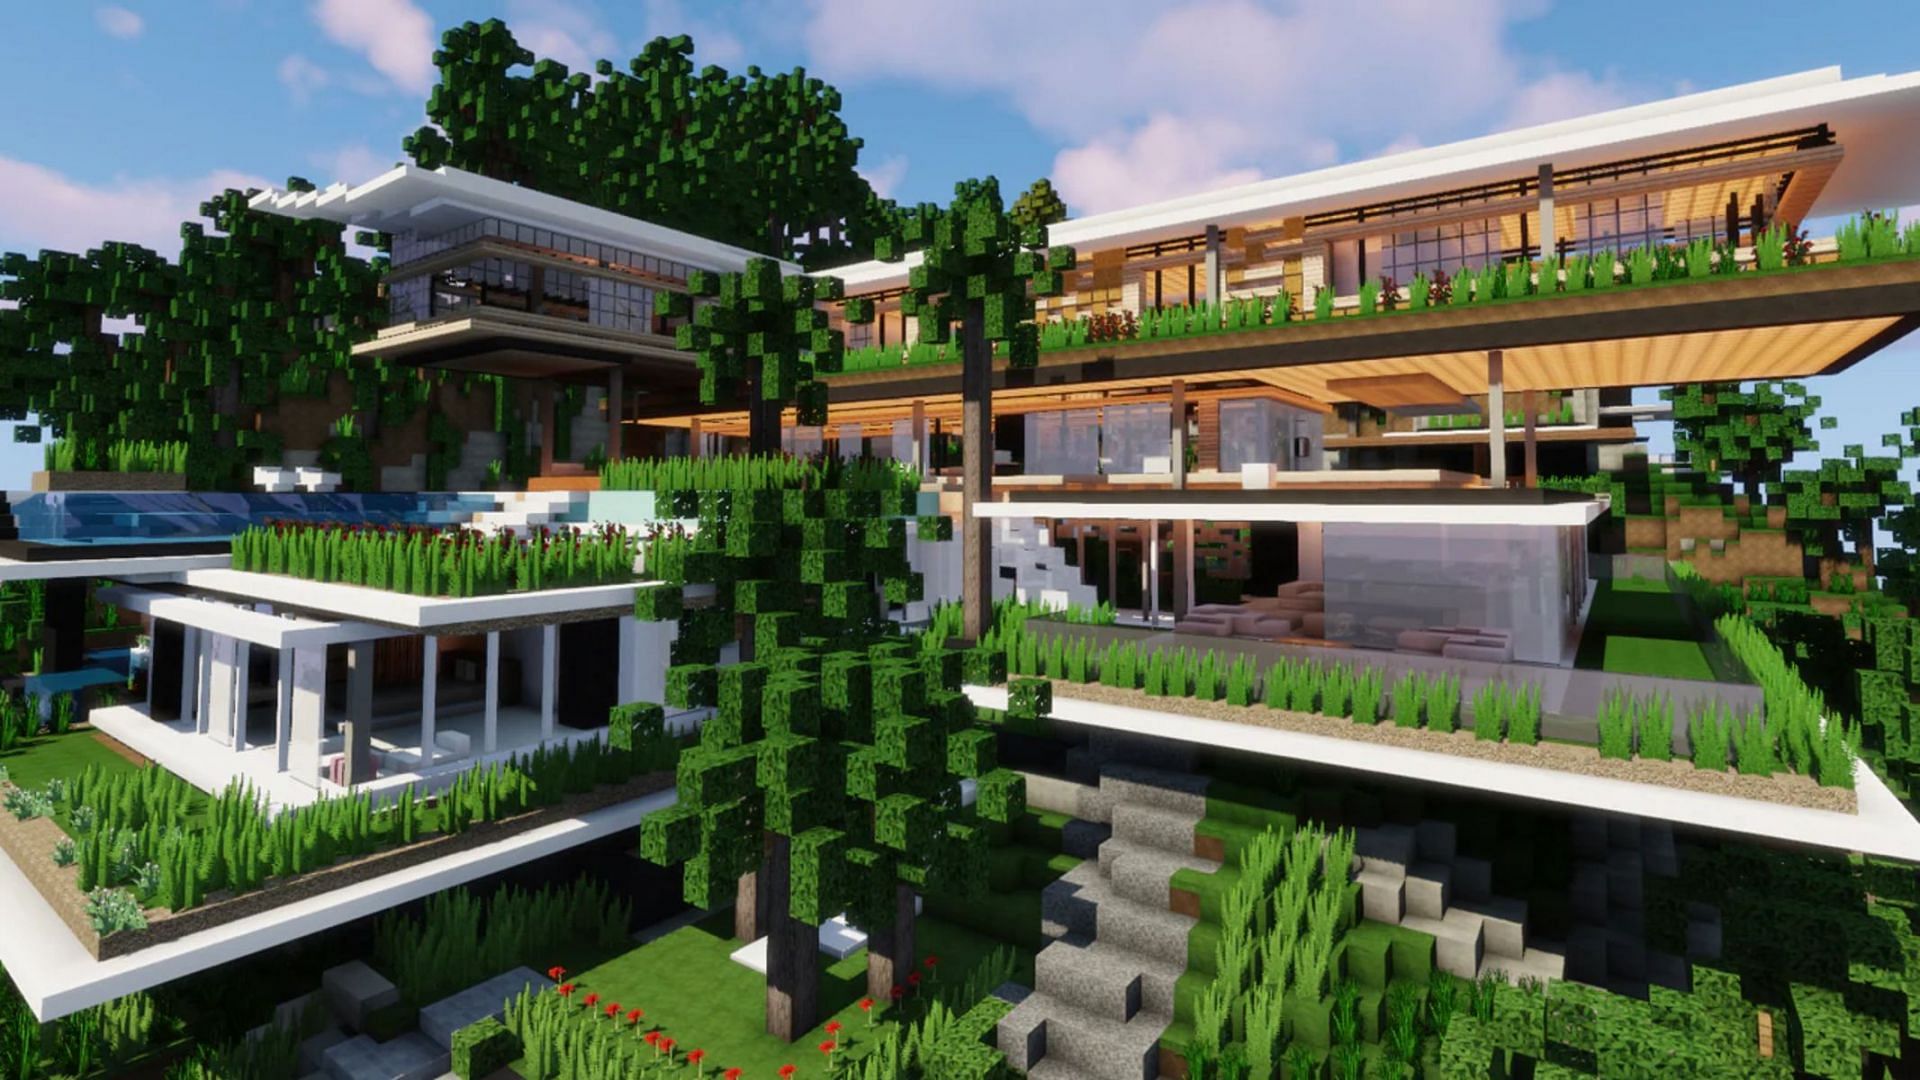 Adding greenery to the exterior adds dimension to the build, emphasizing its form (Image via Minecraft.net)